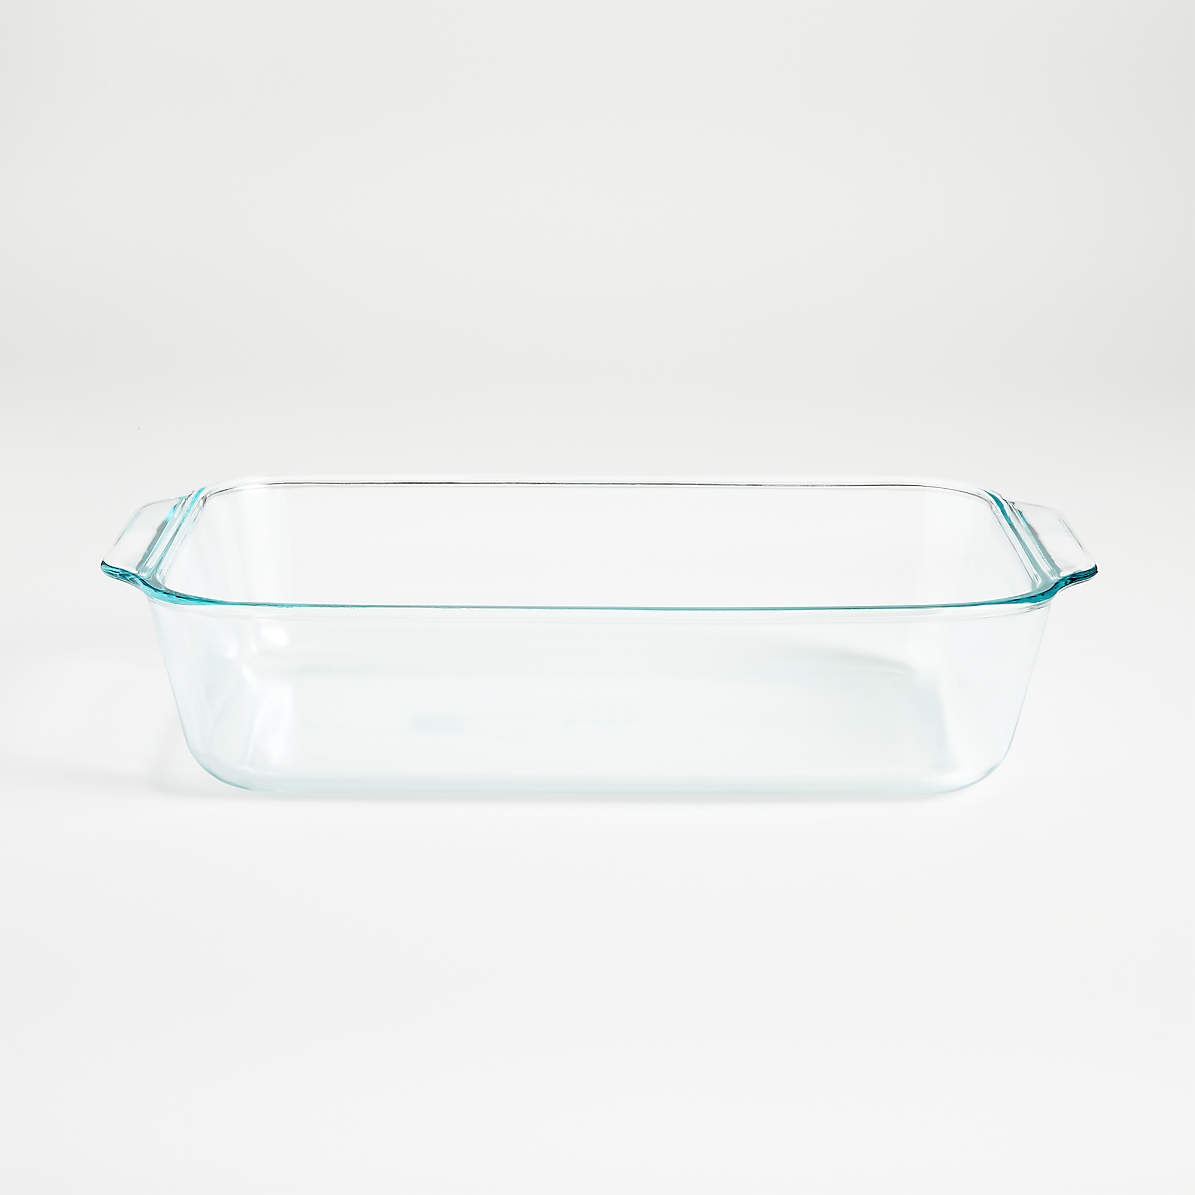 Pyrex Basics Clear Glass Food Storage Dishes, 4 (3-Cup) Oblong Dishes with Turquoise Plastic Lids